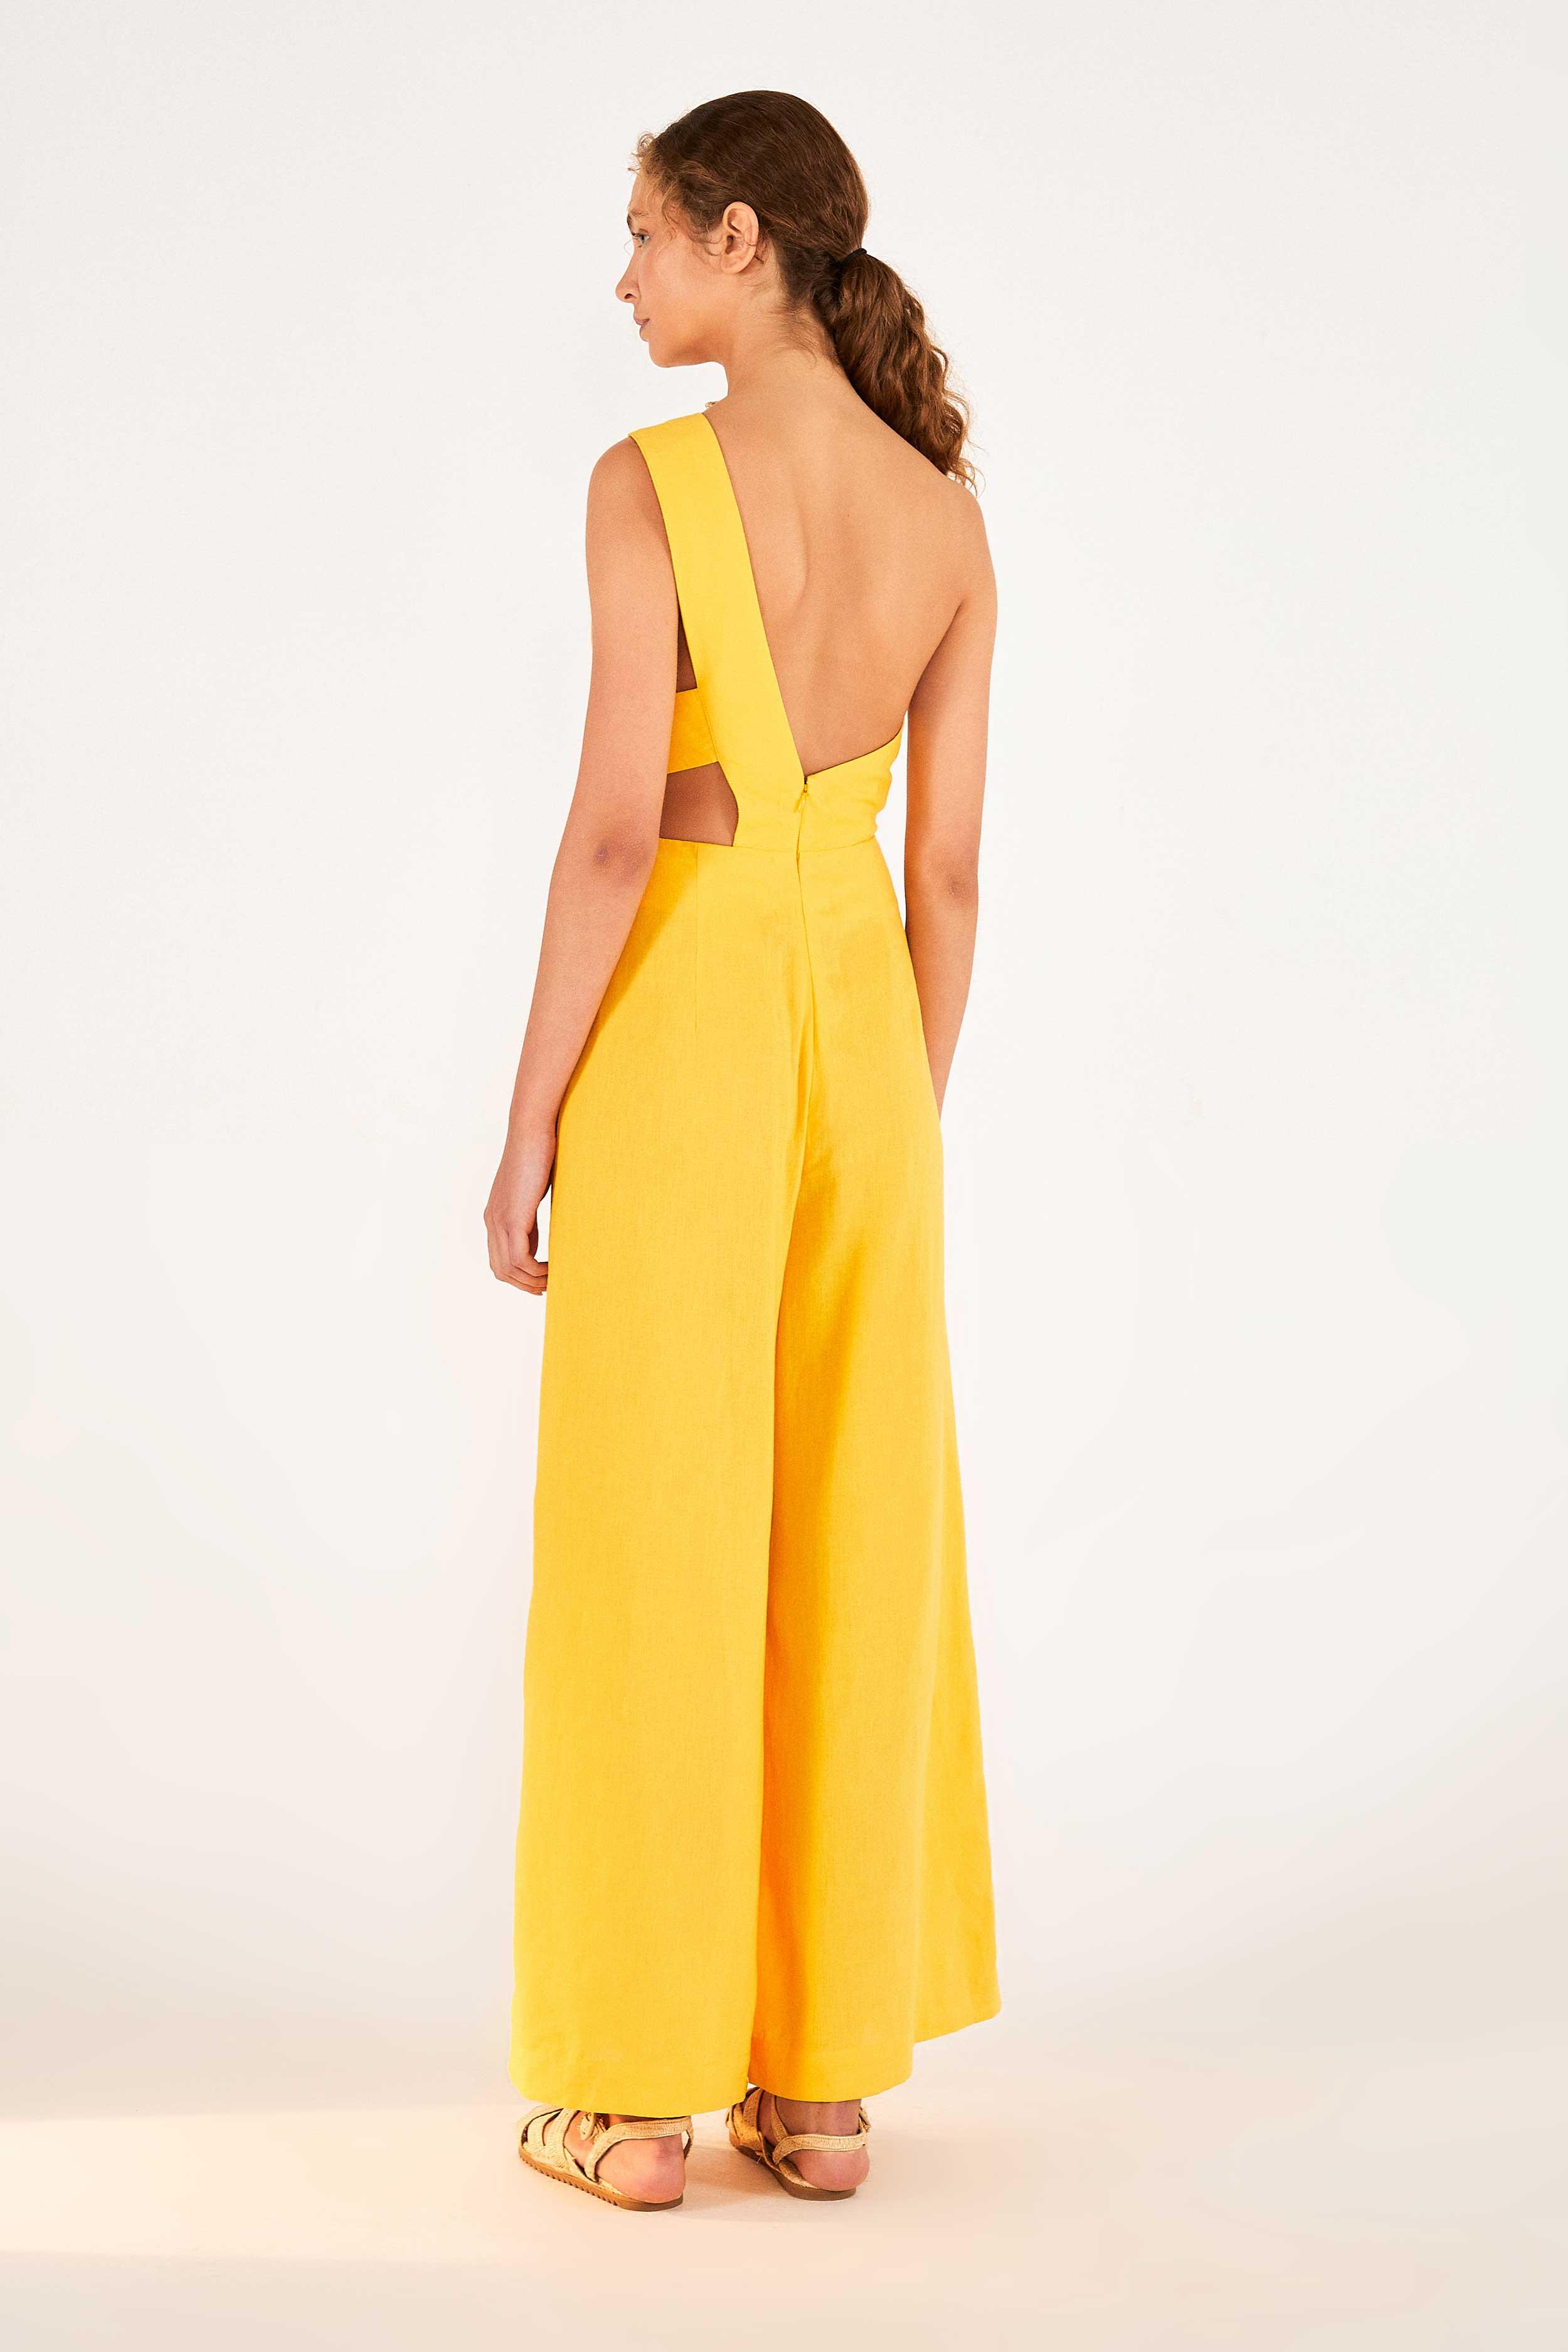 White One-Shoulder Jumpsuit with Attached Train – Modsele